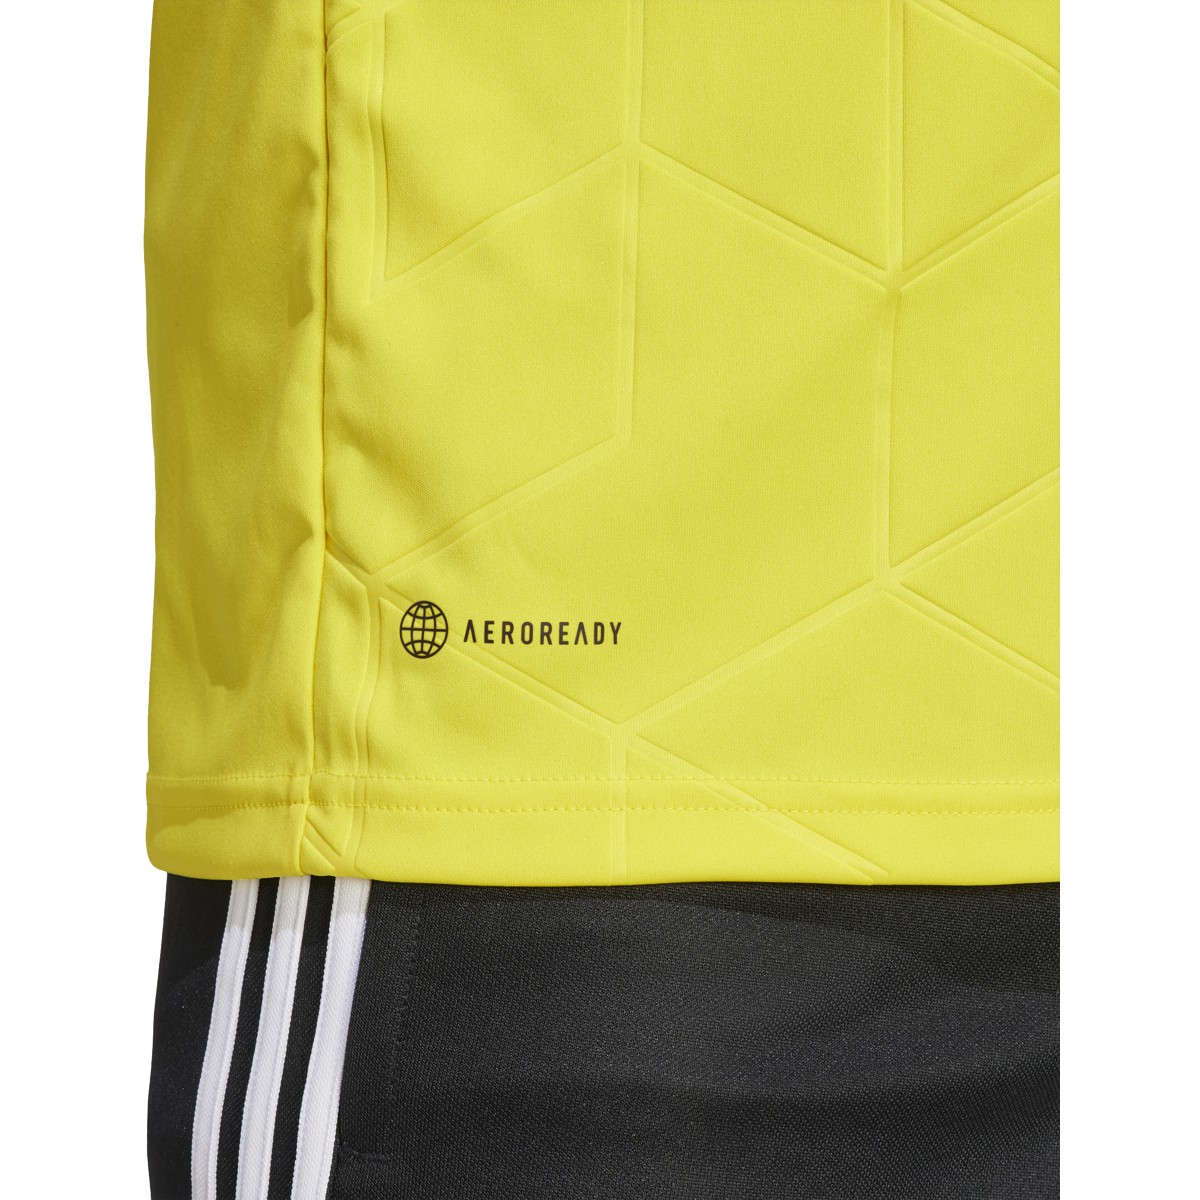 Men's Authentic adidas Columbus Crew Home Jersey 2022/23 HB4512 – Soccer  Zone USA